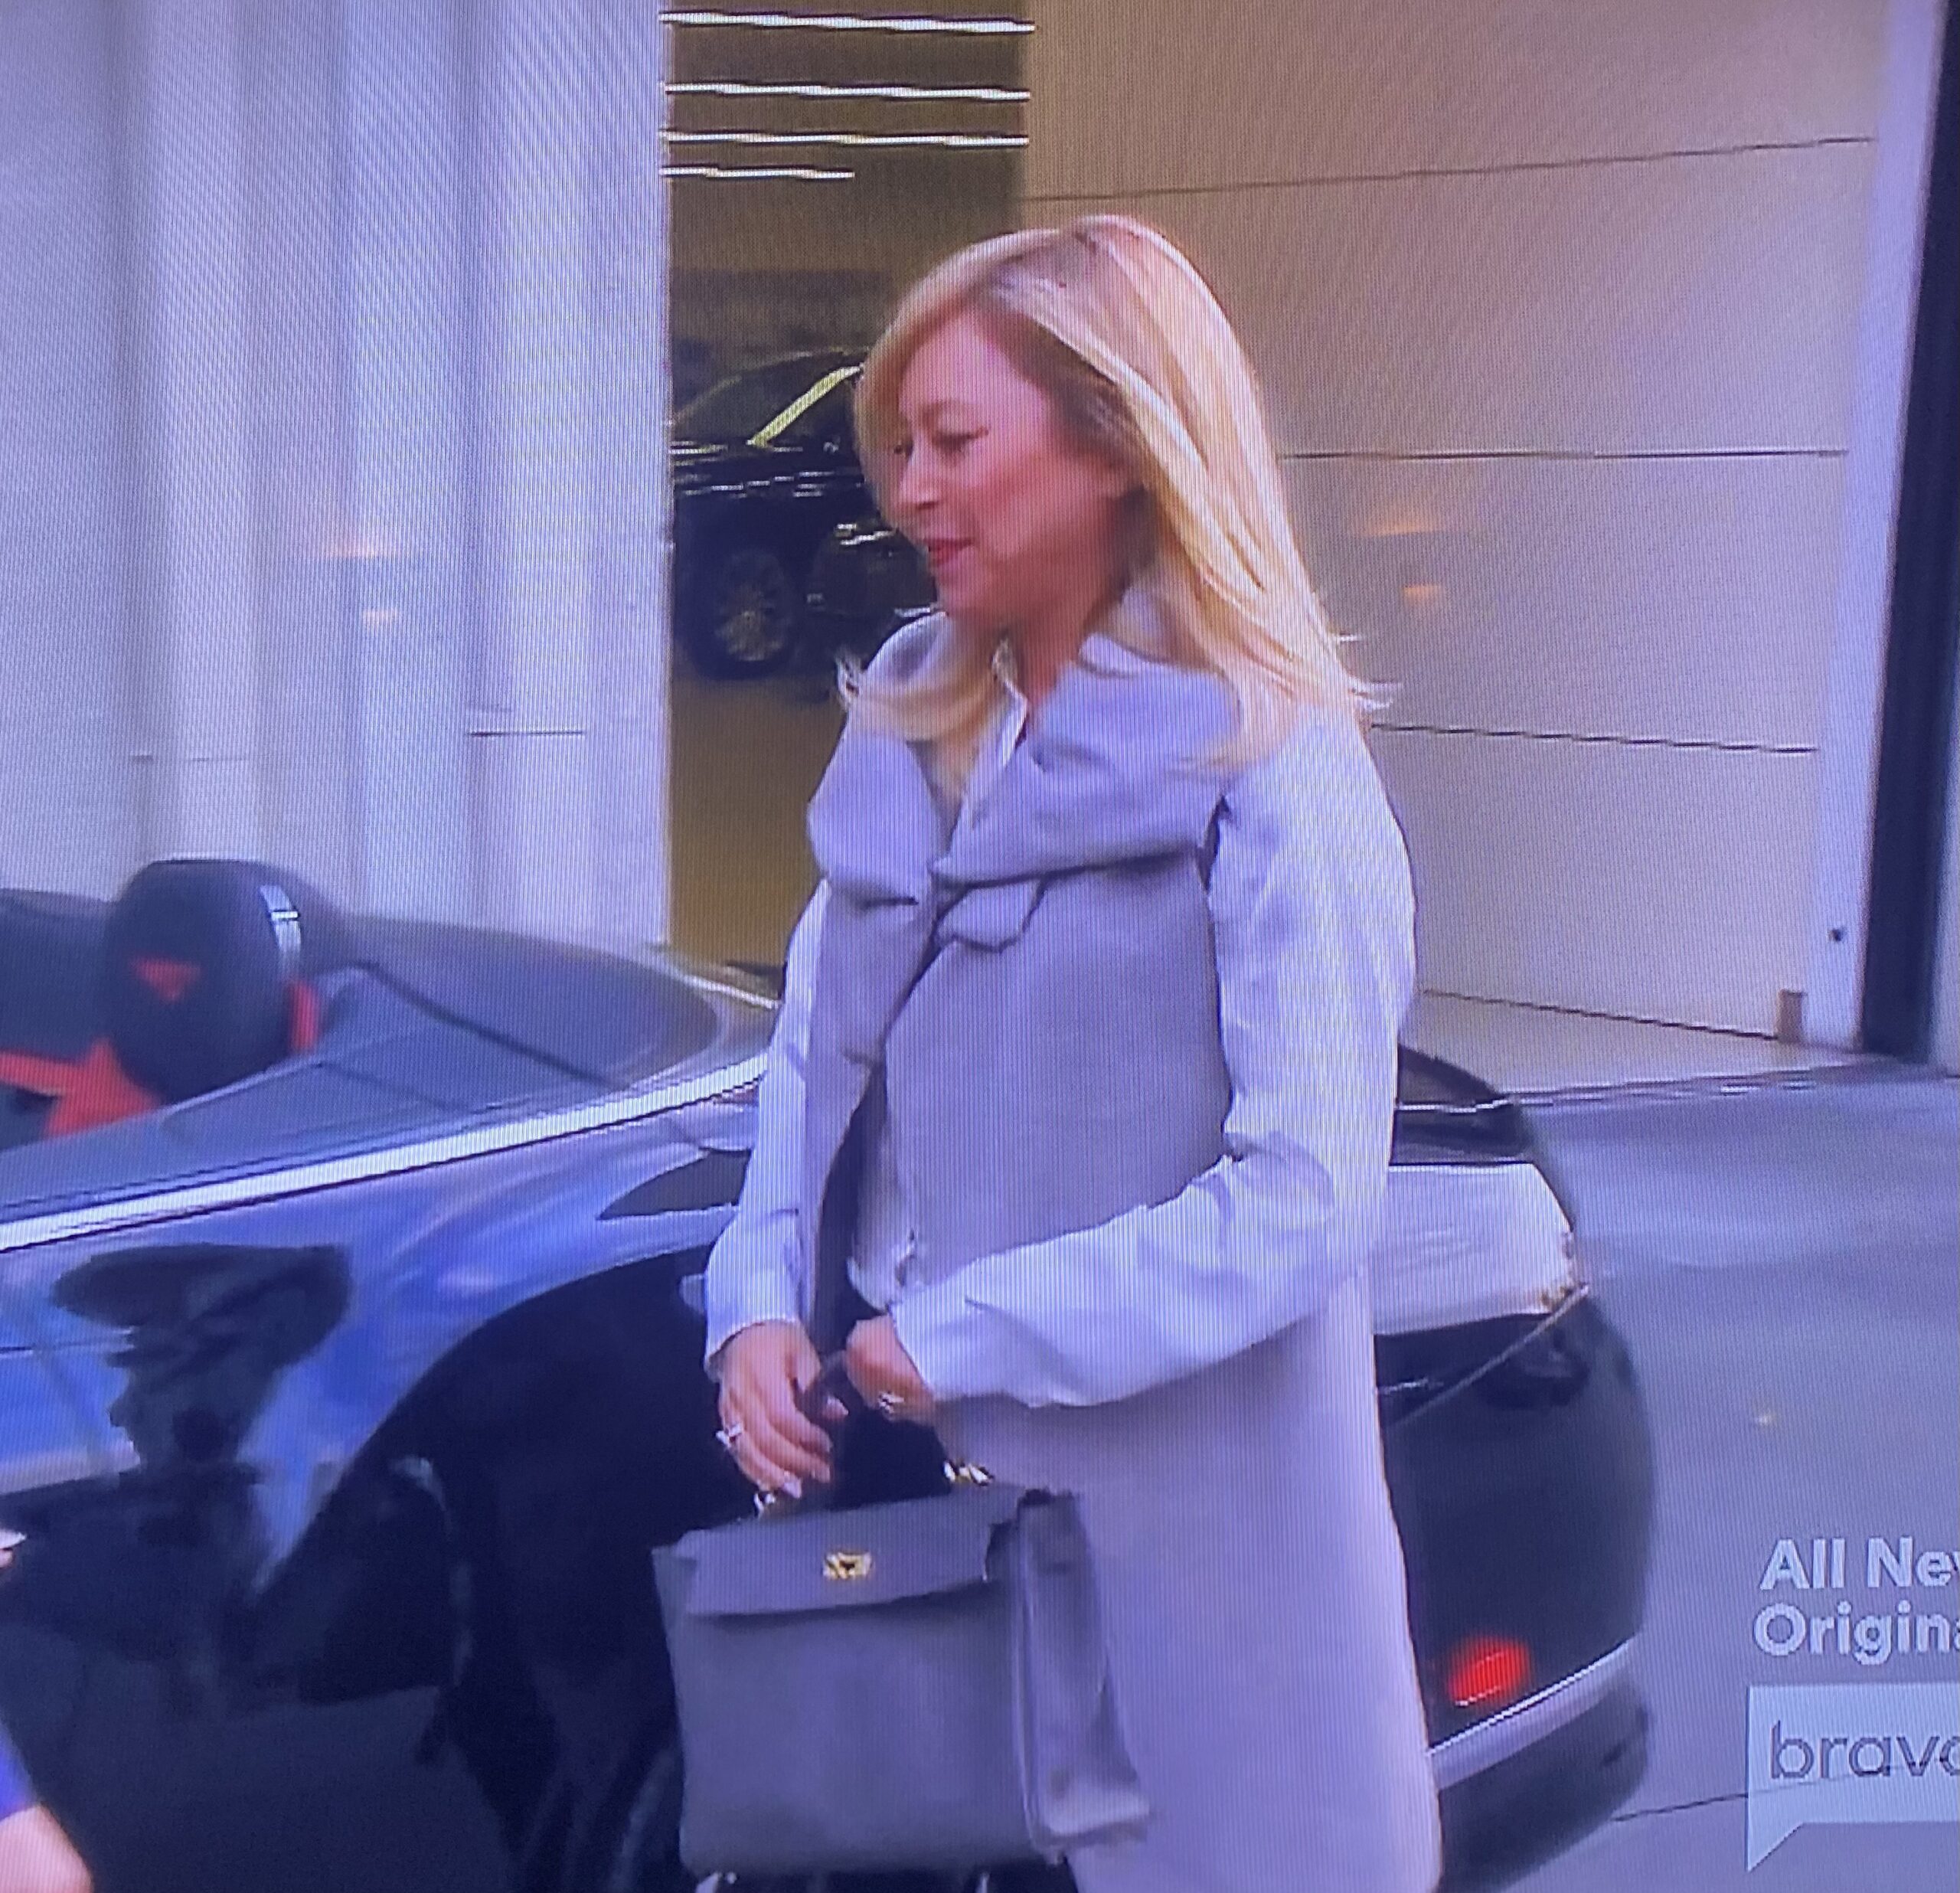 How Many Hermès Bags Did You See on The Real Housewives of Beverly Hills?